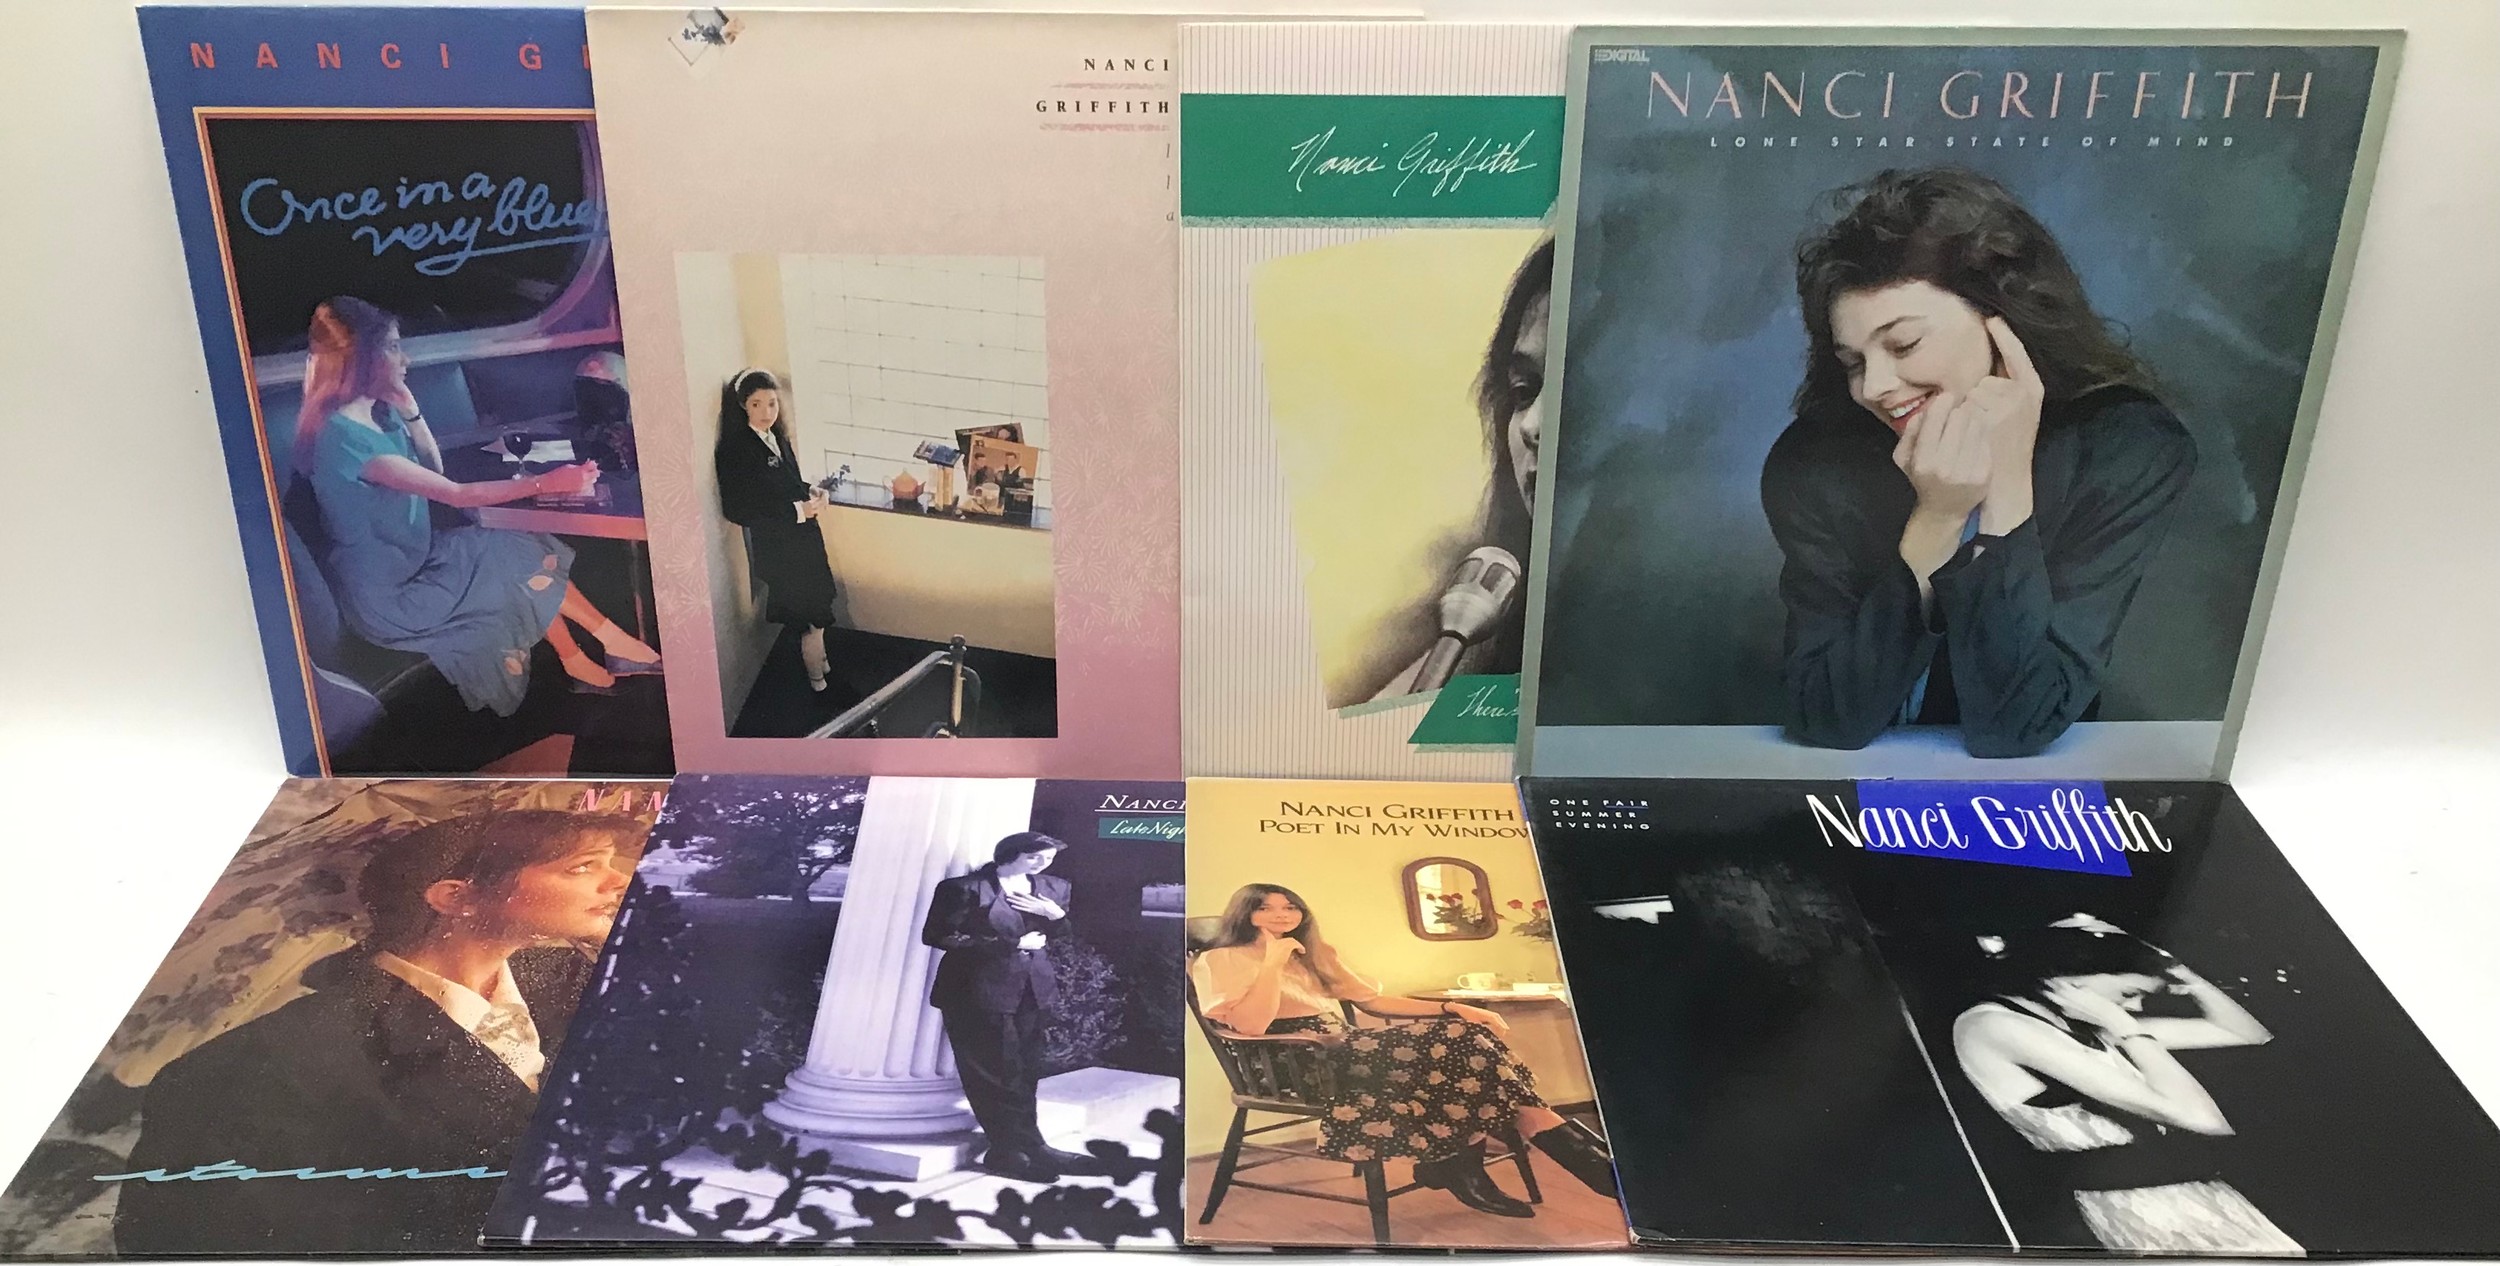 8 X NANCI GRIFFITH LP VINYL RECORDS. To include - Late Night Grand Hotel - Storms - Poet In My